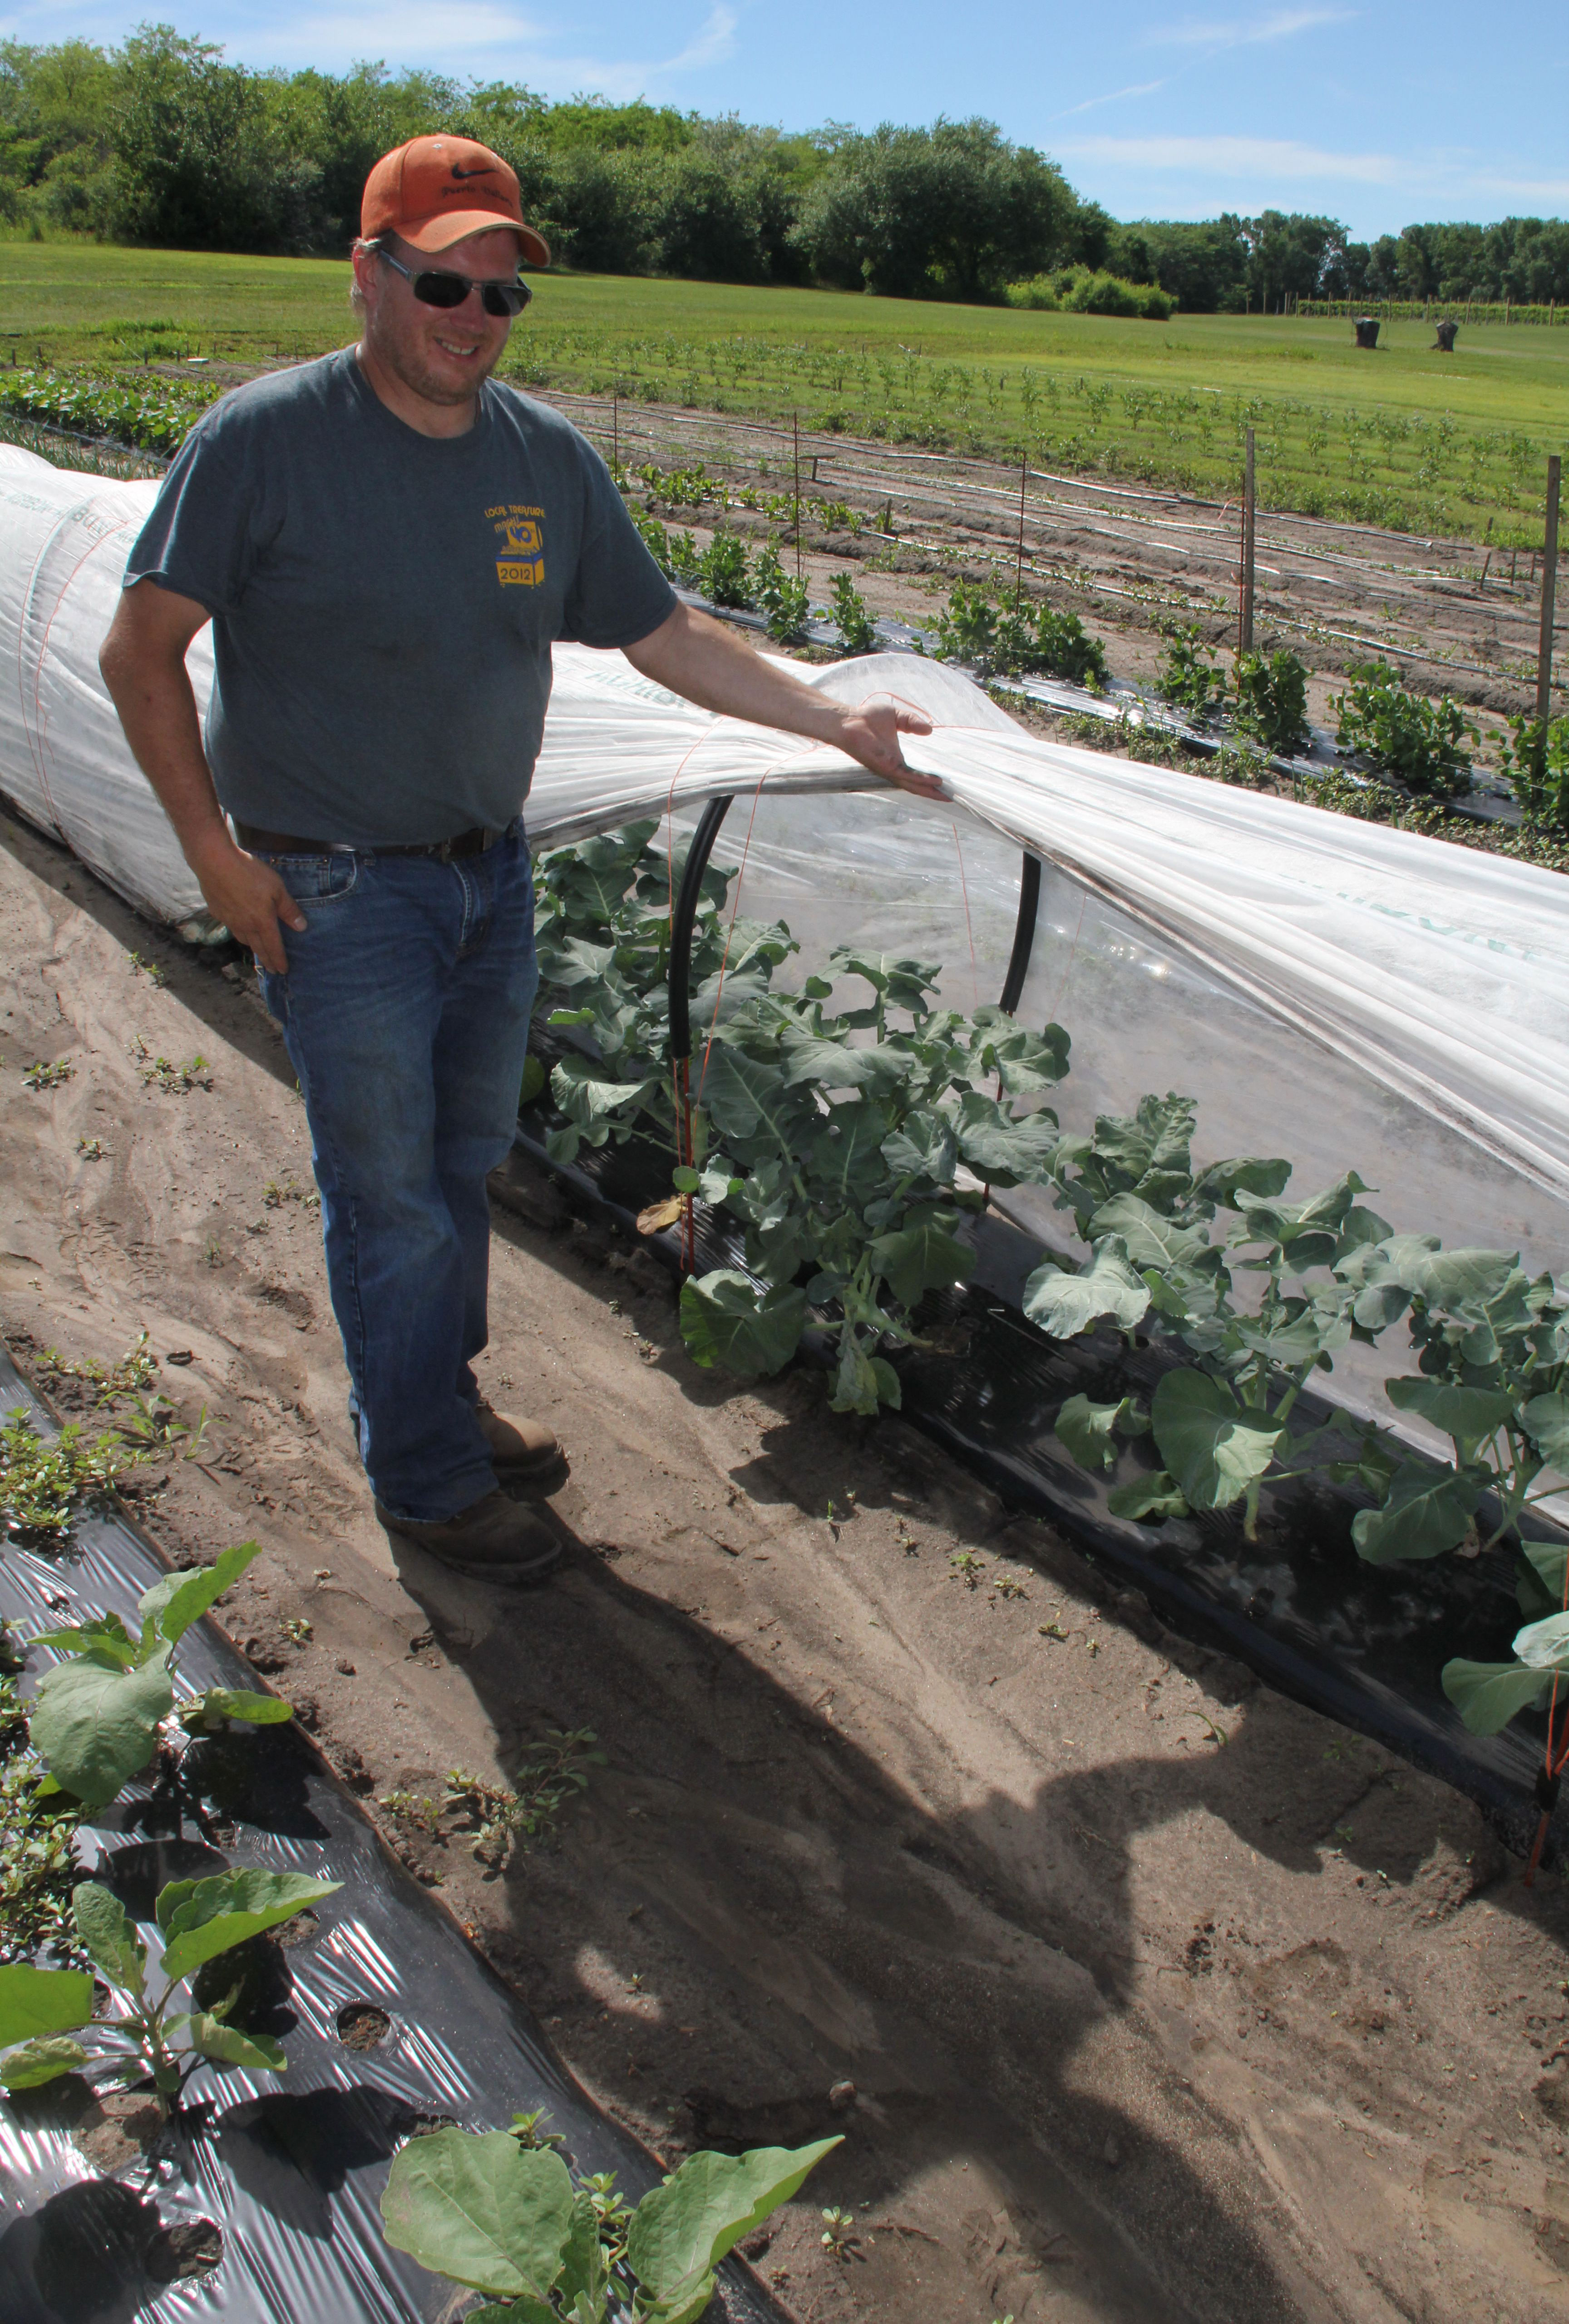 A man demonstrating a plastic, floating row cover above a row of garden plantings.